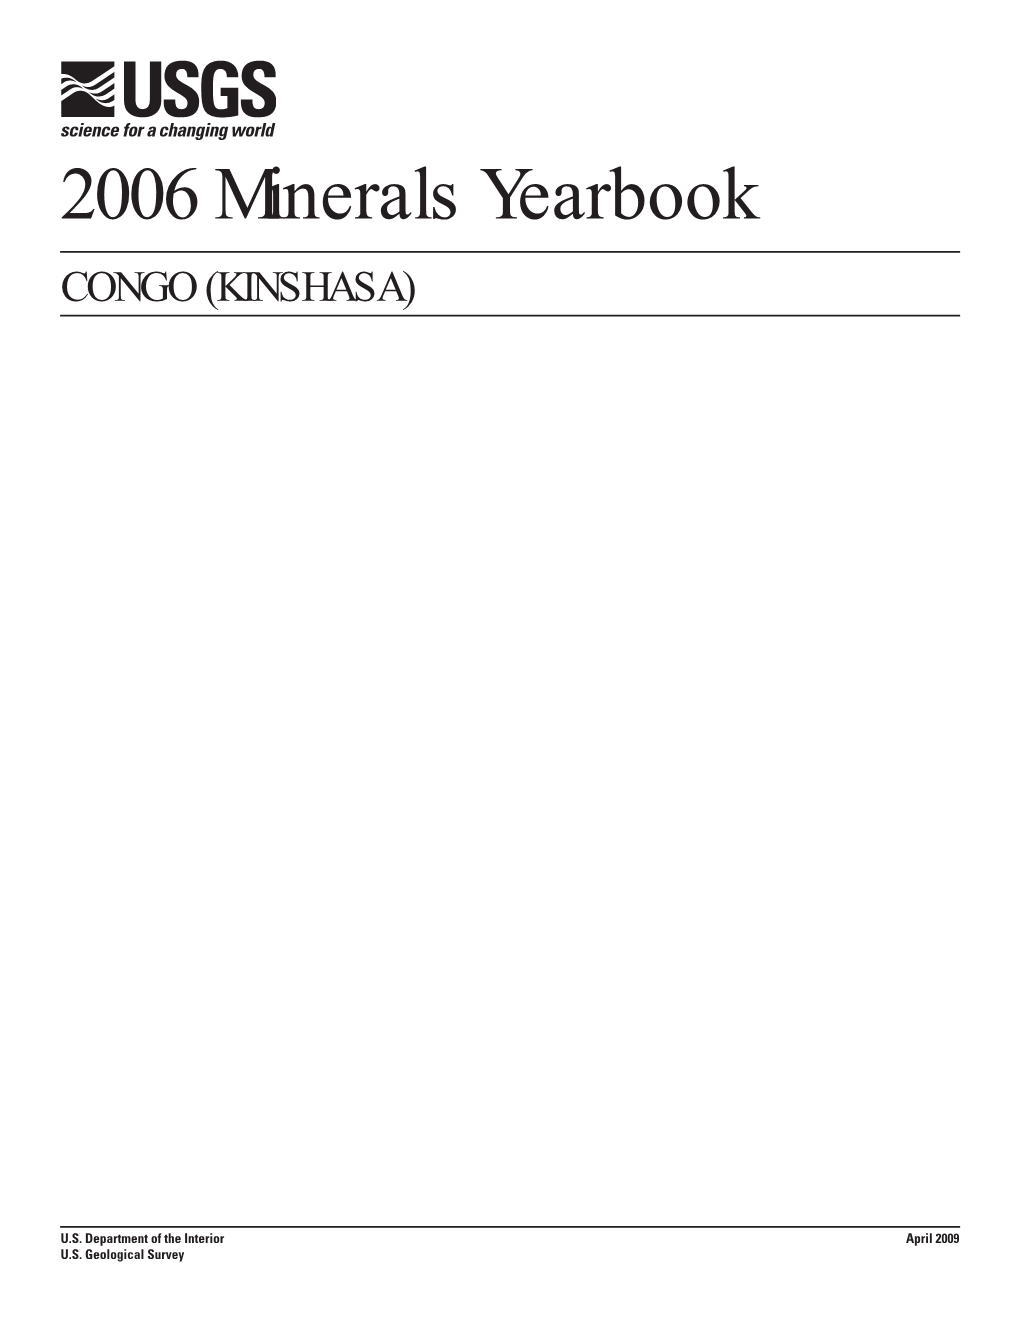 The Mineral Industry of Congo (Kinshasa) in 2006